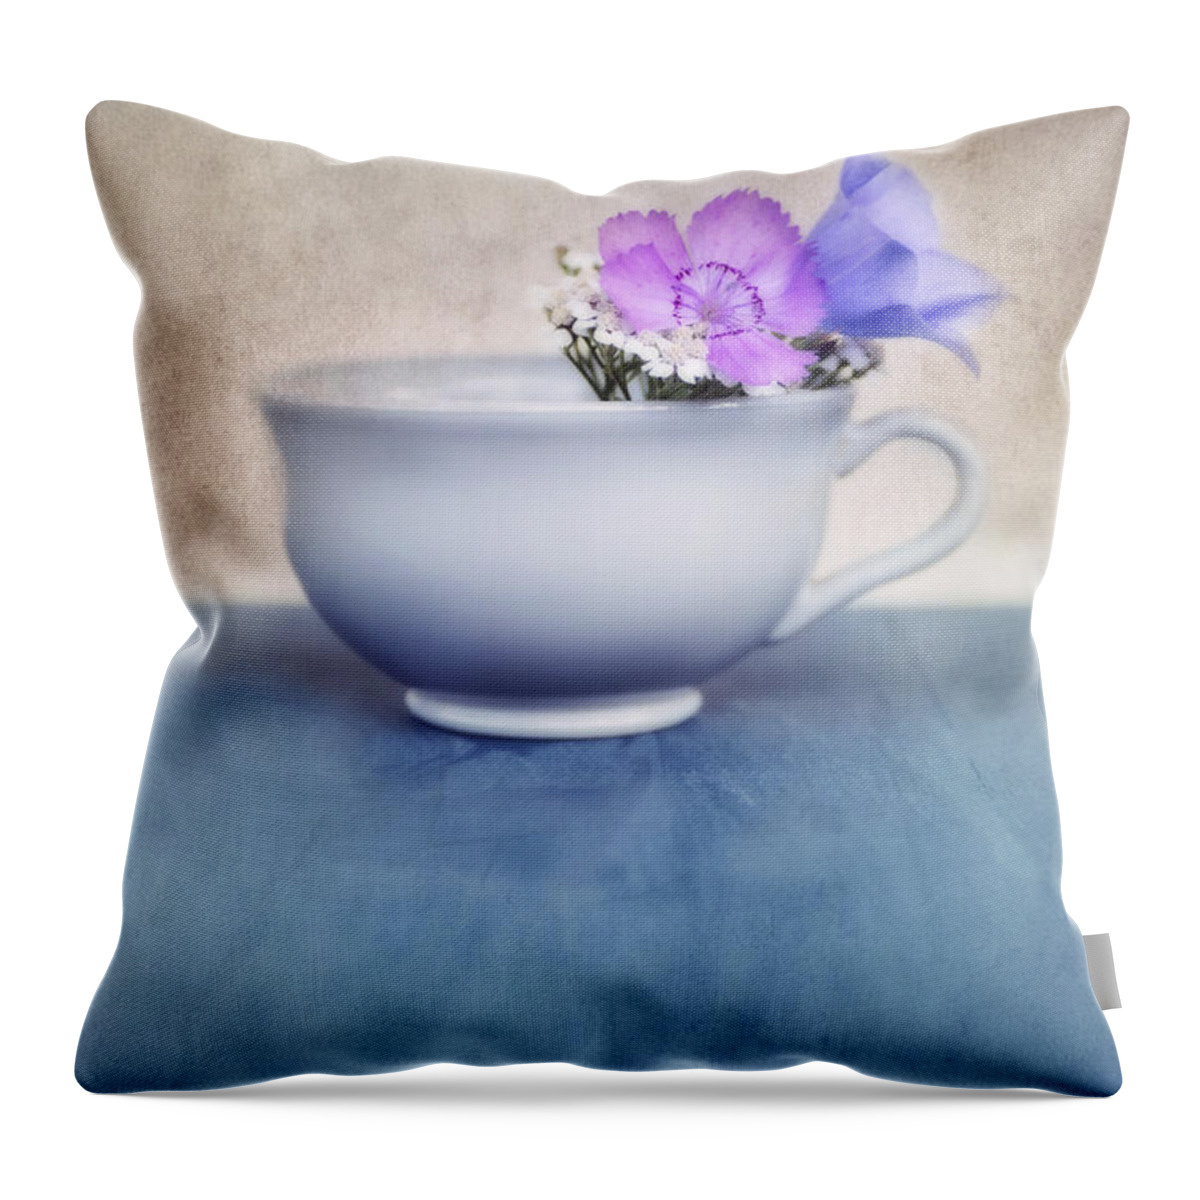 .cup Throw Pillow featuring the photograph New Life For An Old Coffee Cup by Priska Wettstein